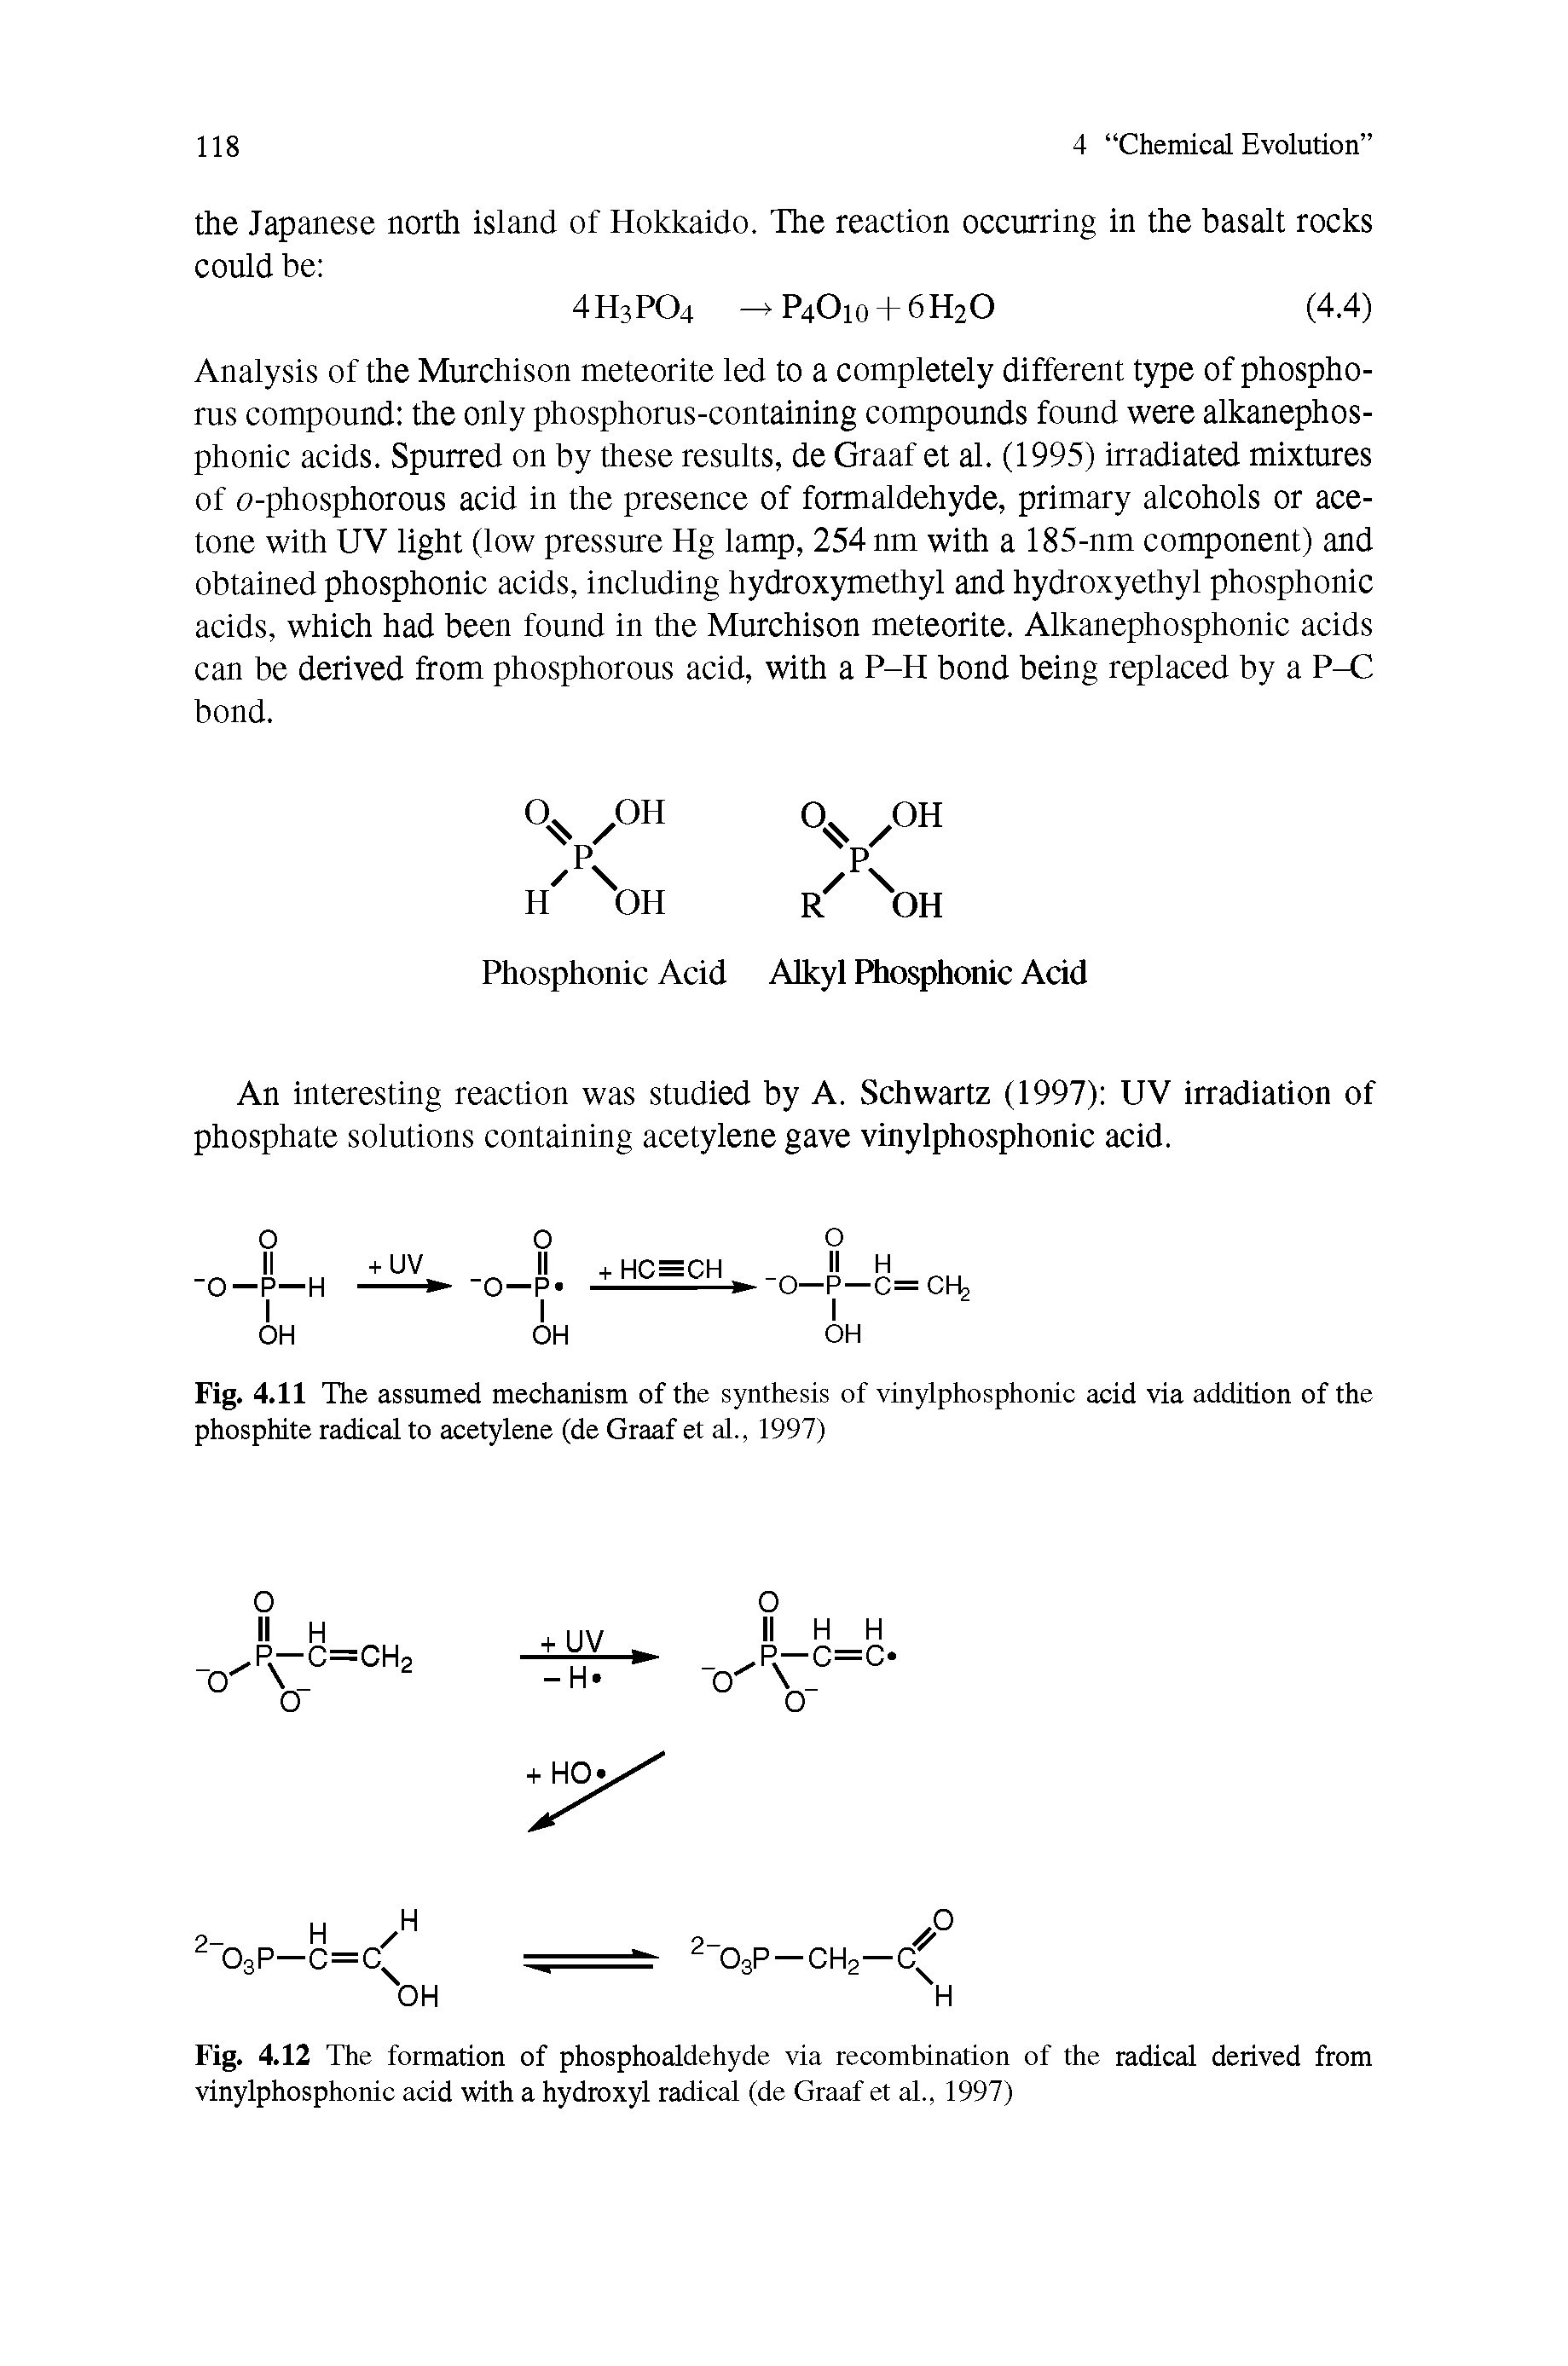 Fig. 4.12 The formation of phosphoaldehyde via recombination of the radical derived from vinylphosphonic acid with a hydroxyl radical (de Graaf et al., 1997)...